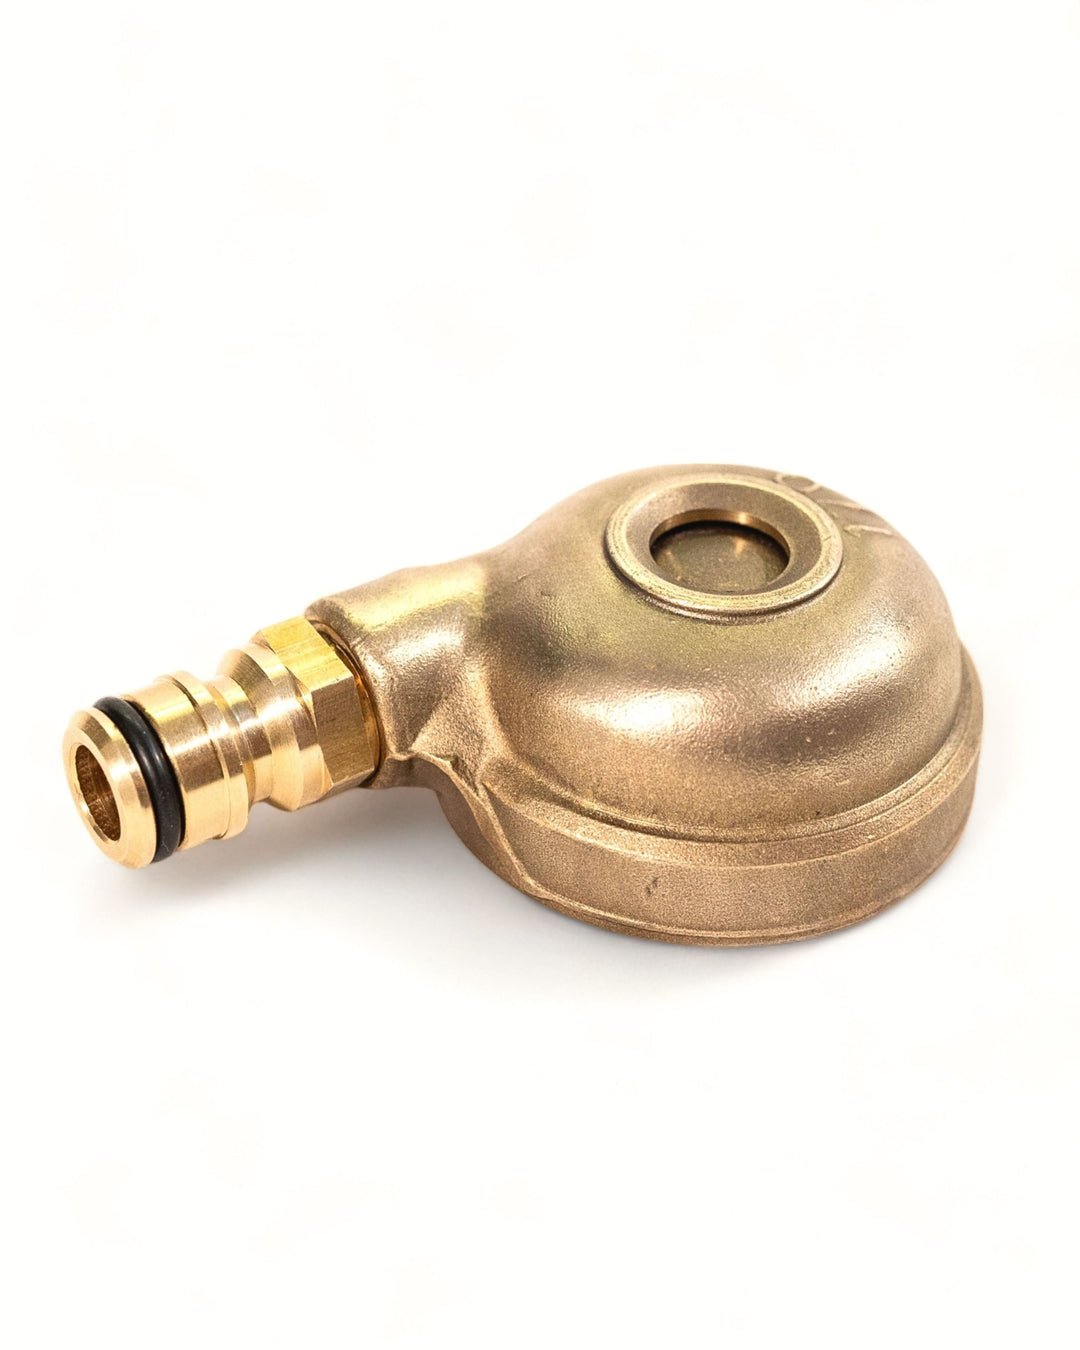 a brass plated water faucet on a white background